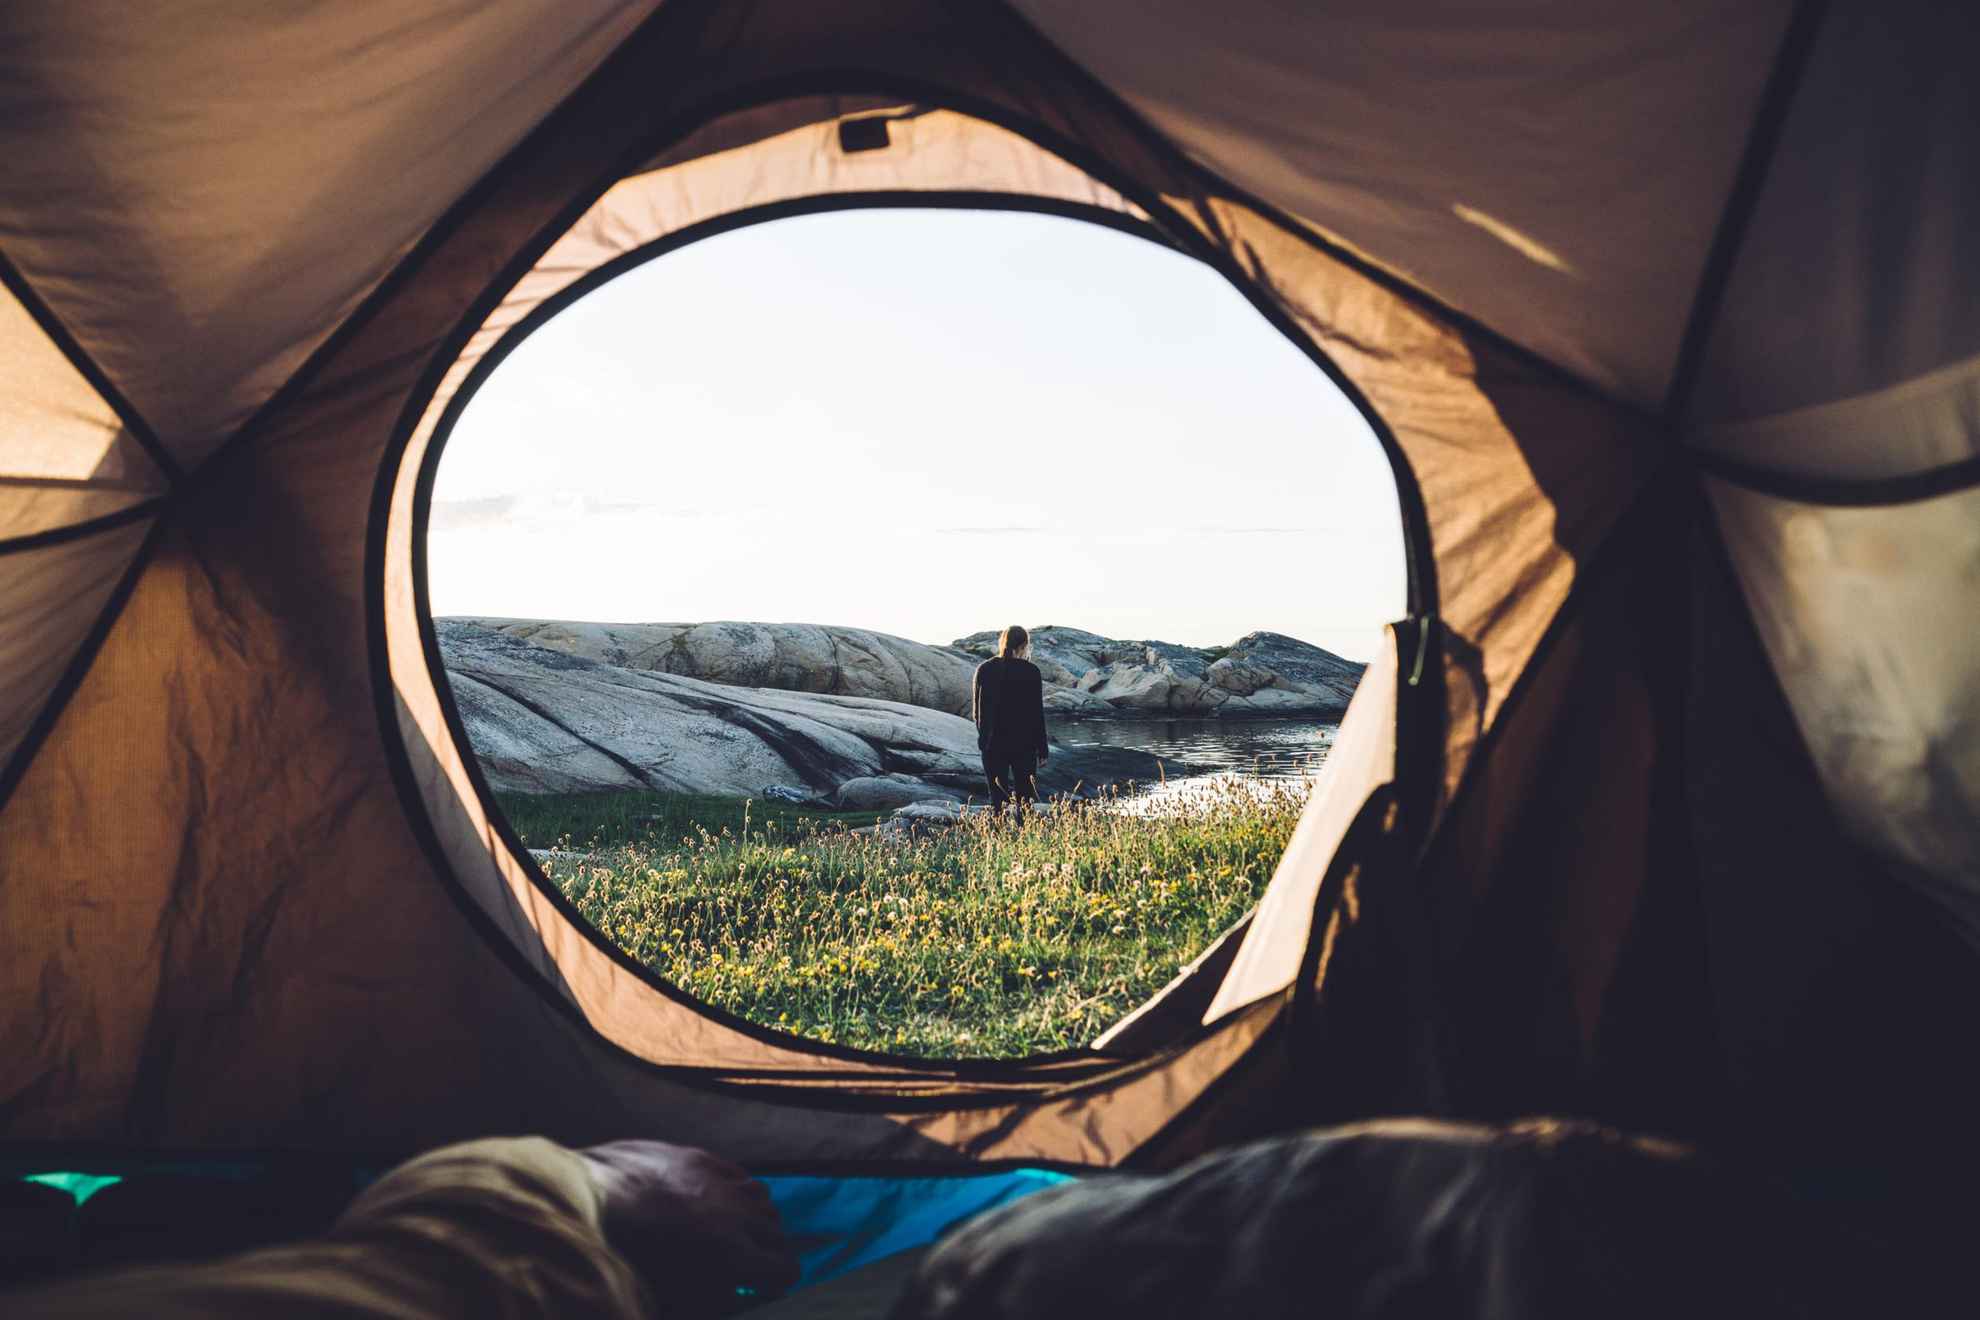 Wake up with a view